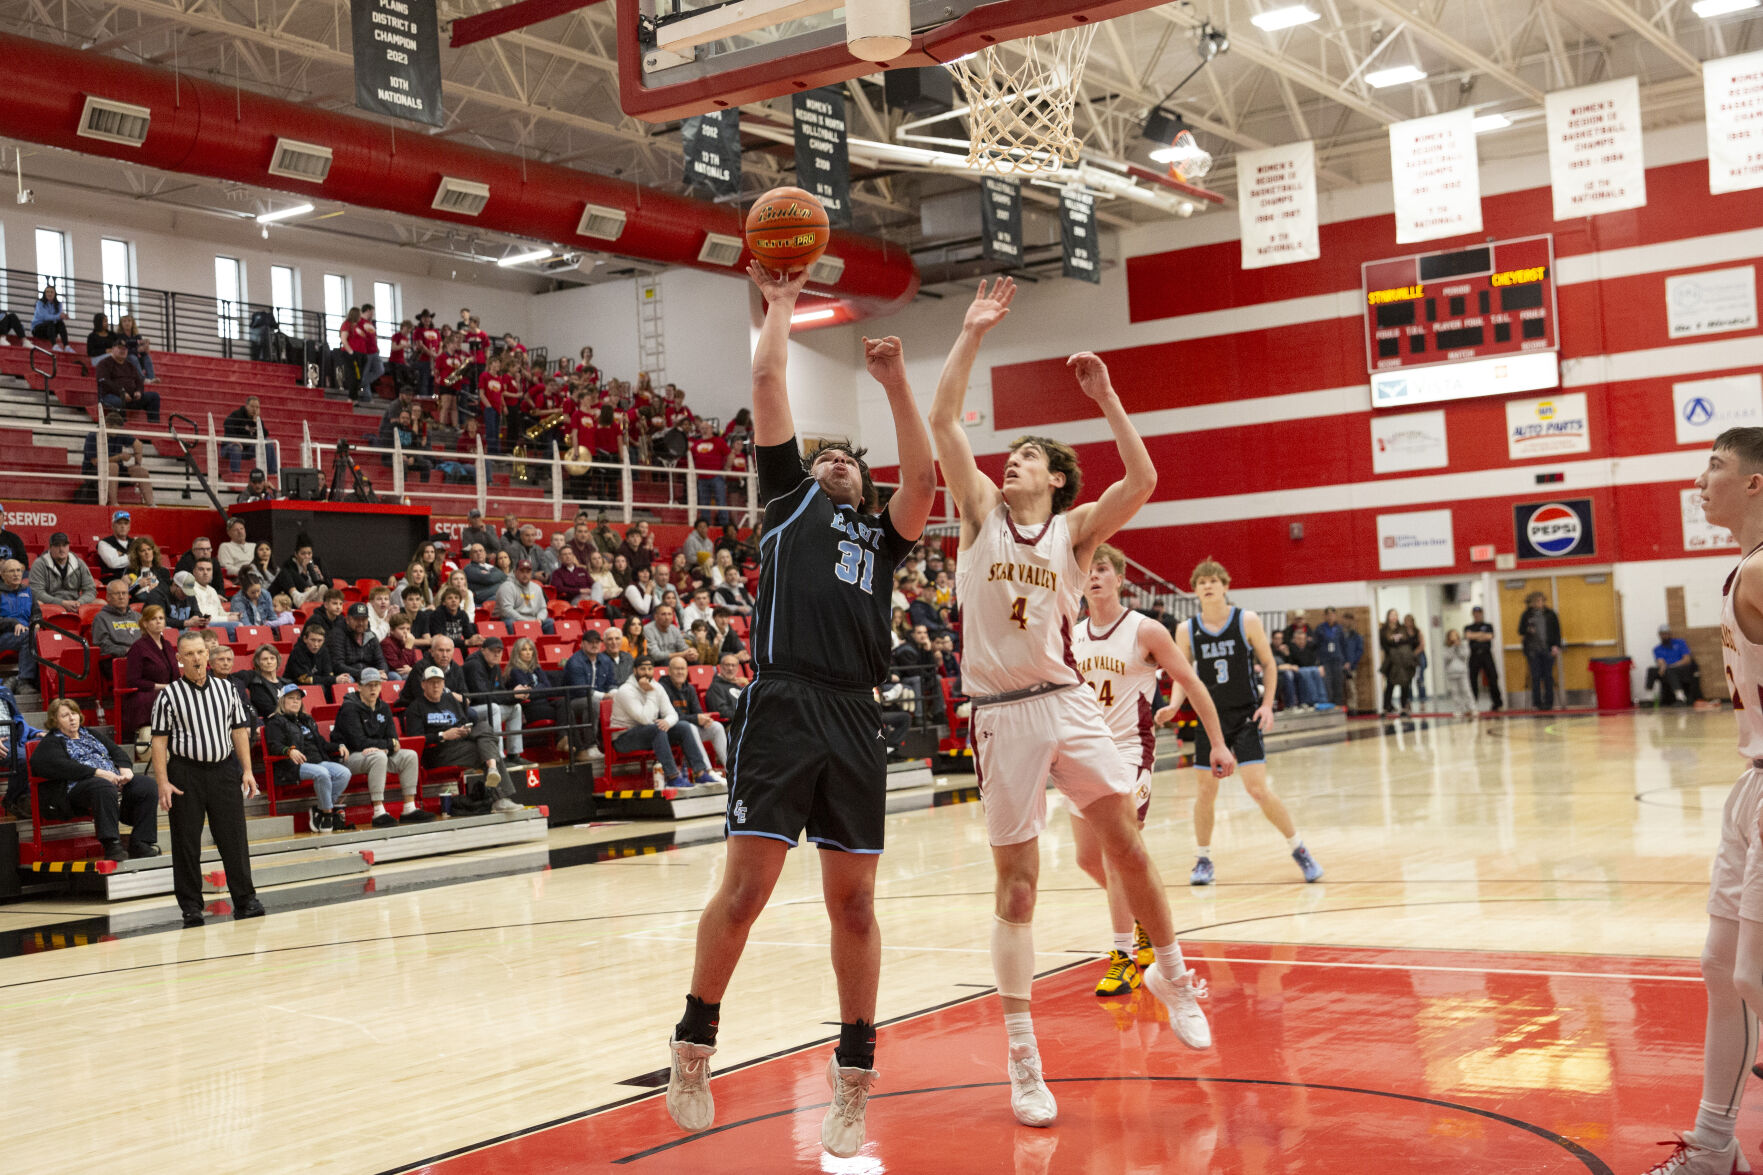 Cheyenne East Boys Fall to Star Valley 45-43 in Class 4A State Tournament